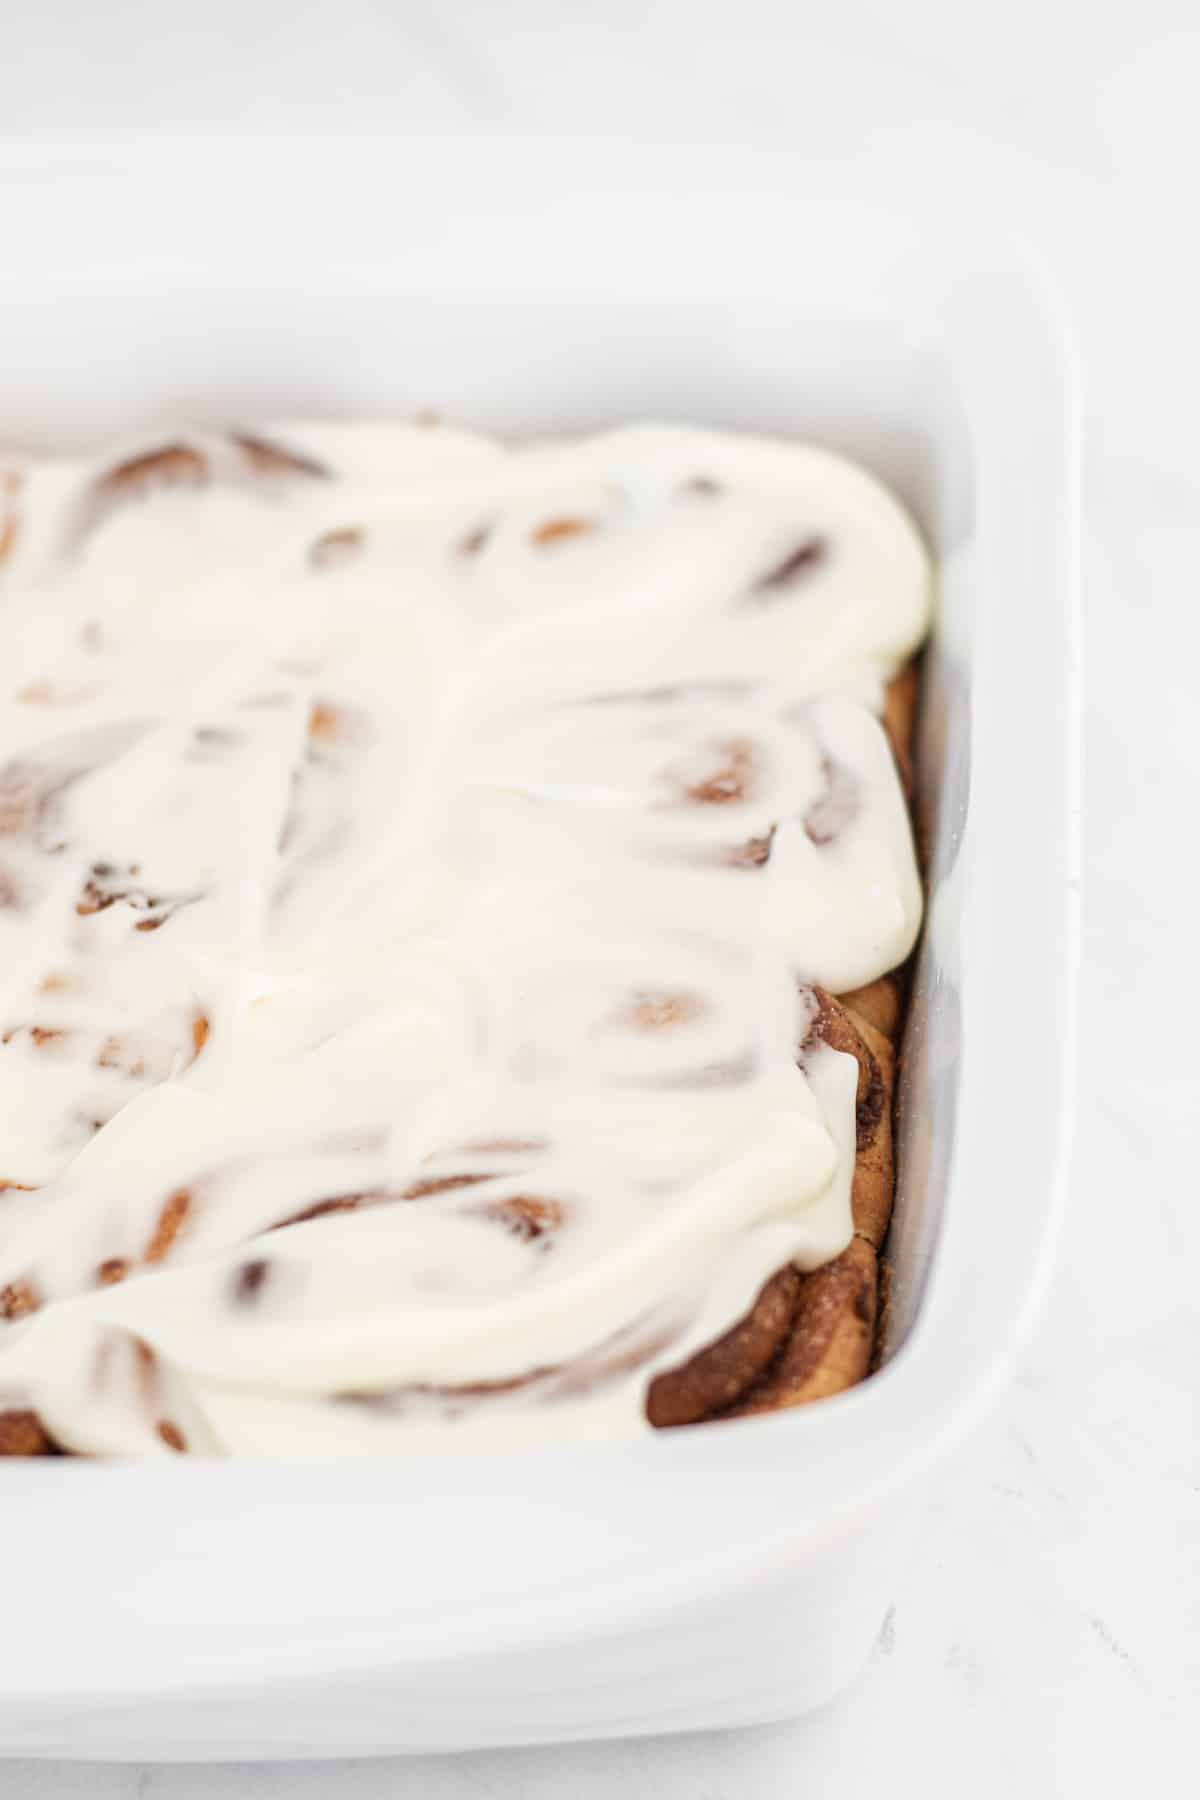 Cinnamon rolls with condensed milk and topped with cream cheese icing in a baking tray.